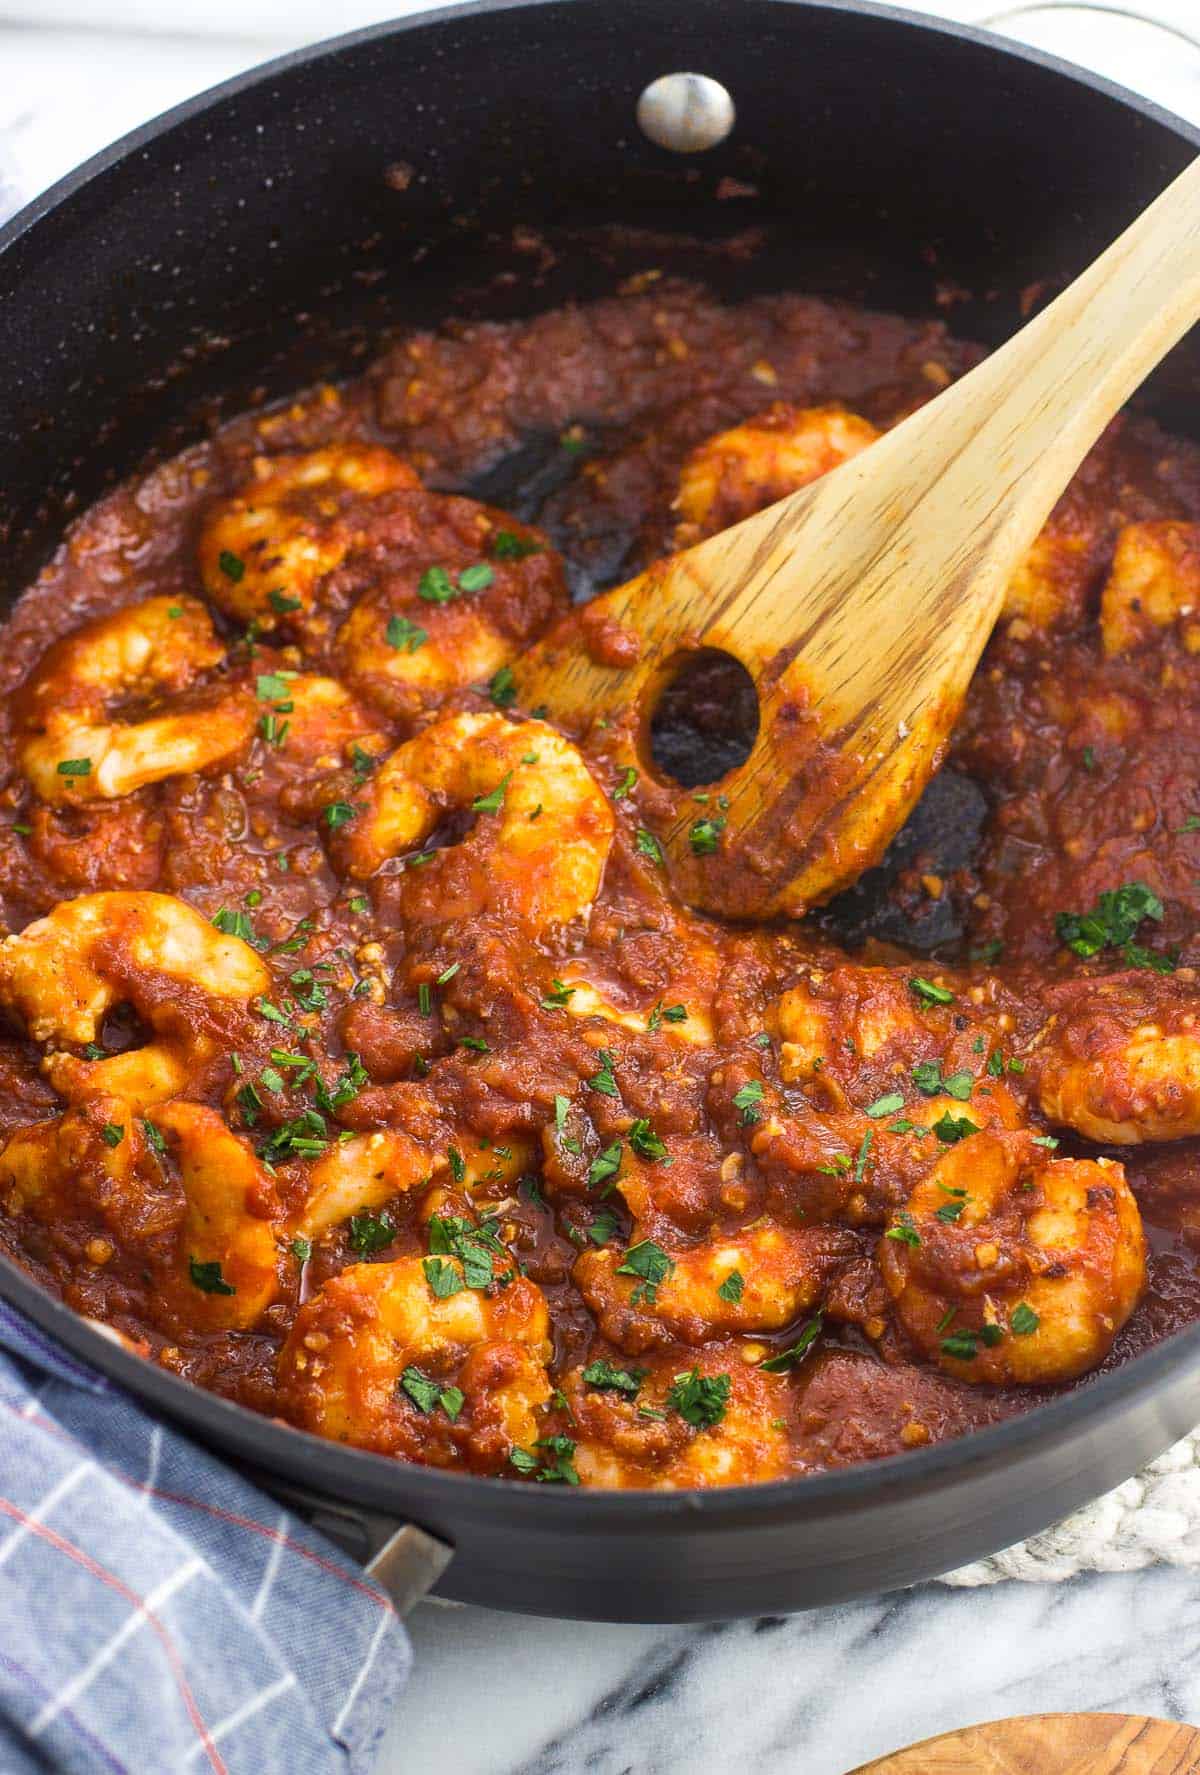 Cooked jumbo shrimp in fra diavolo sauce in a skillet garnished with fresh parsley